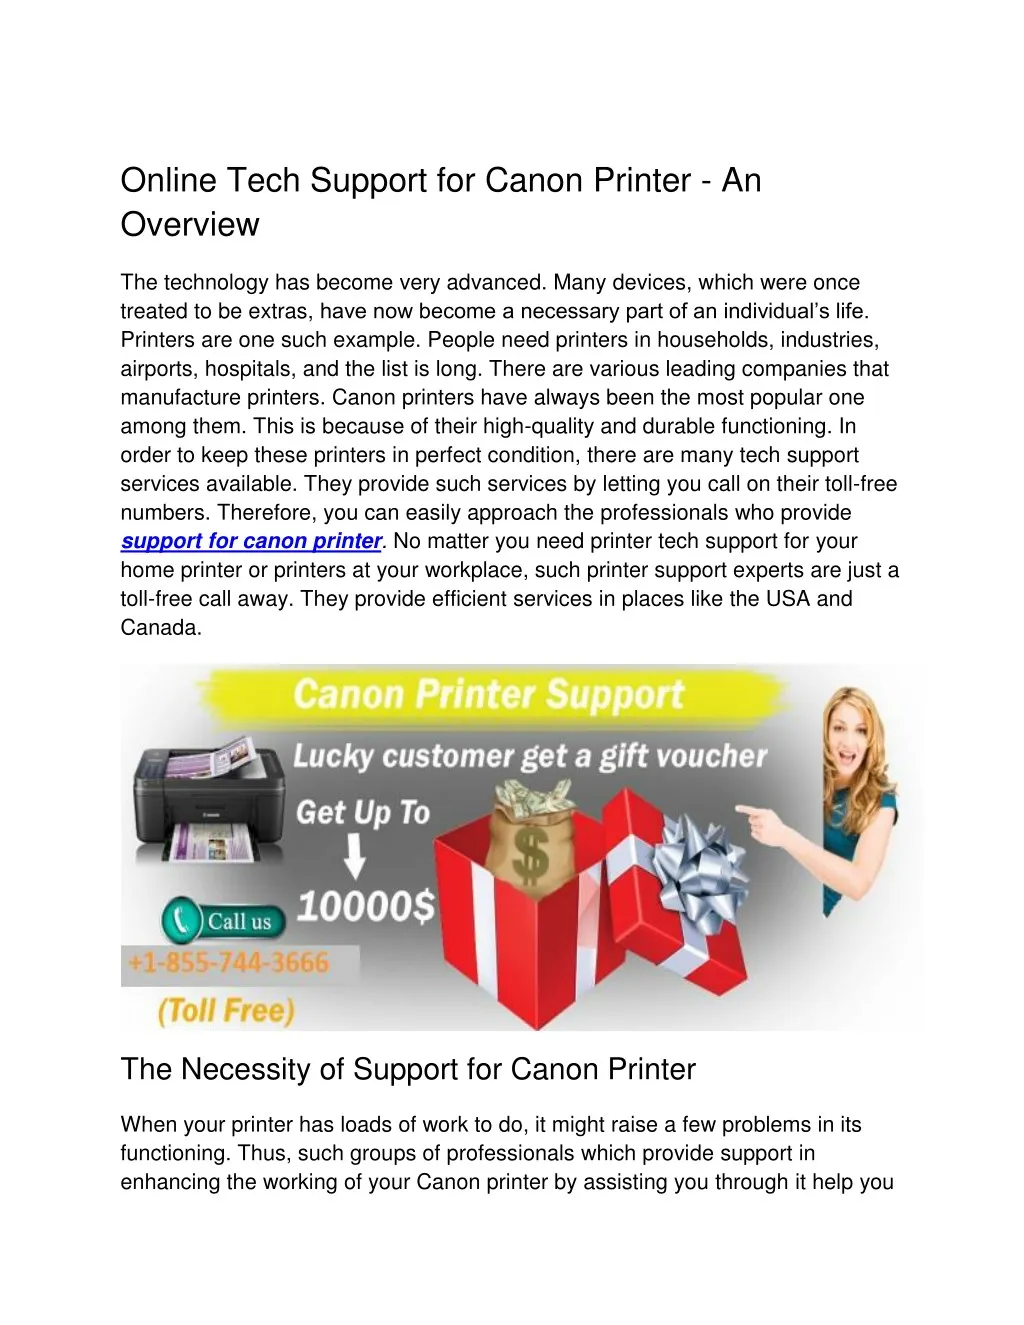 online tech support for canon printer an overview